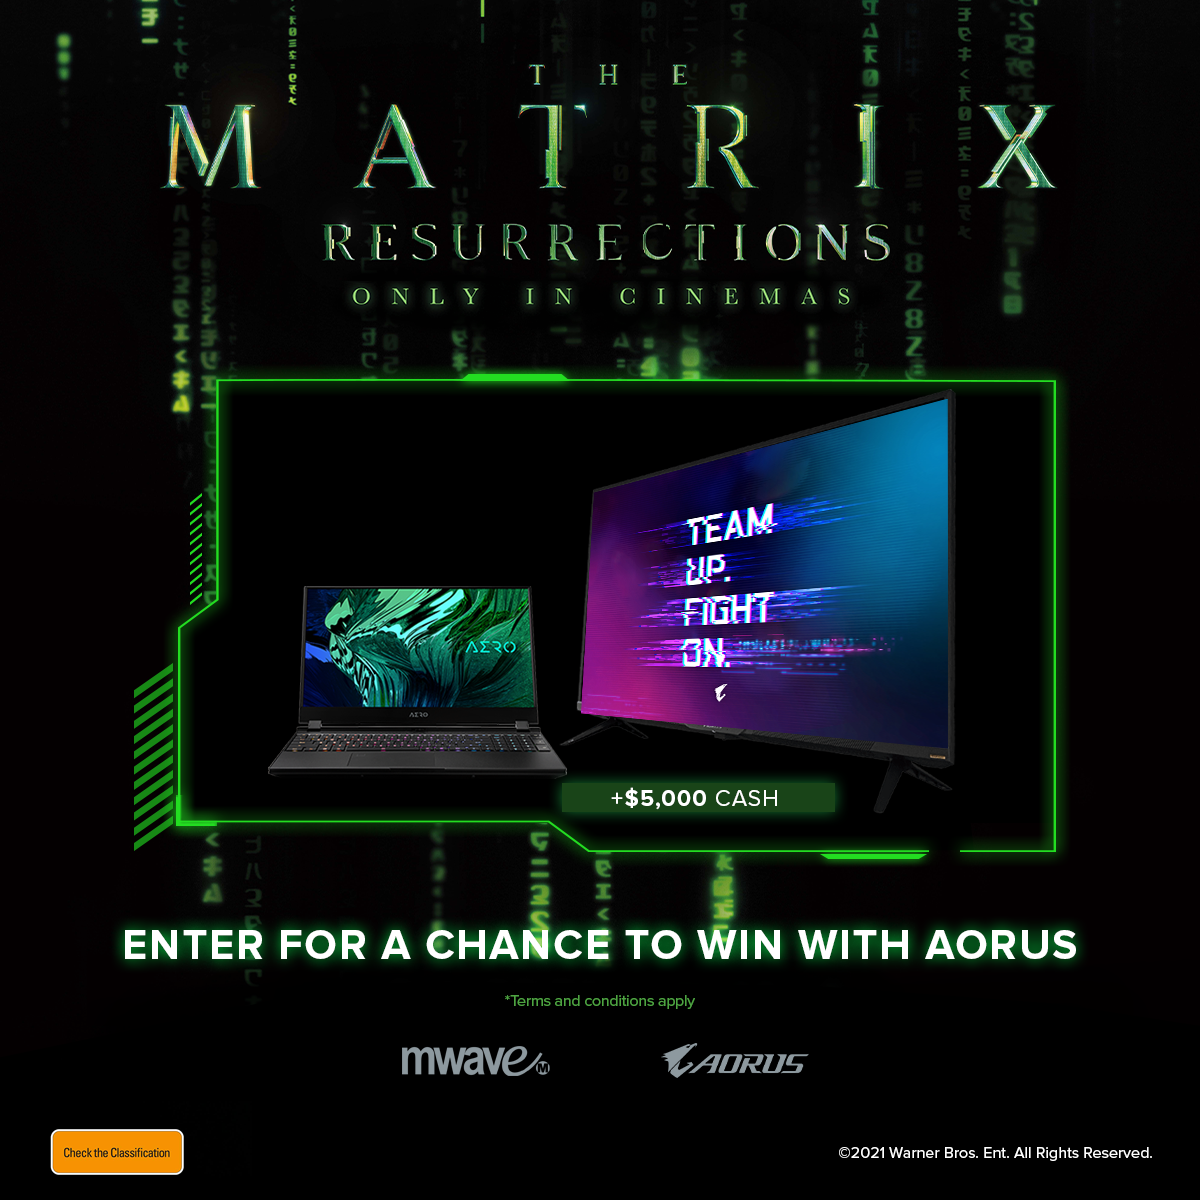 ENTER FOR A CHANCE TO WIN WITH AORUS